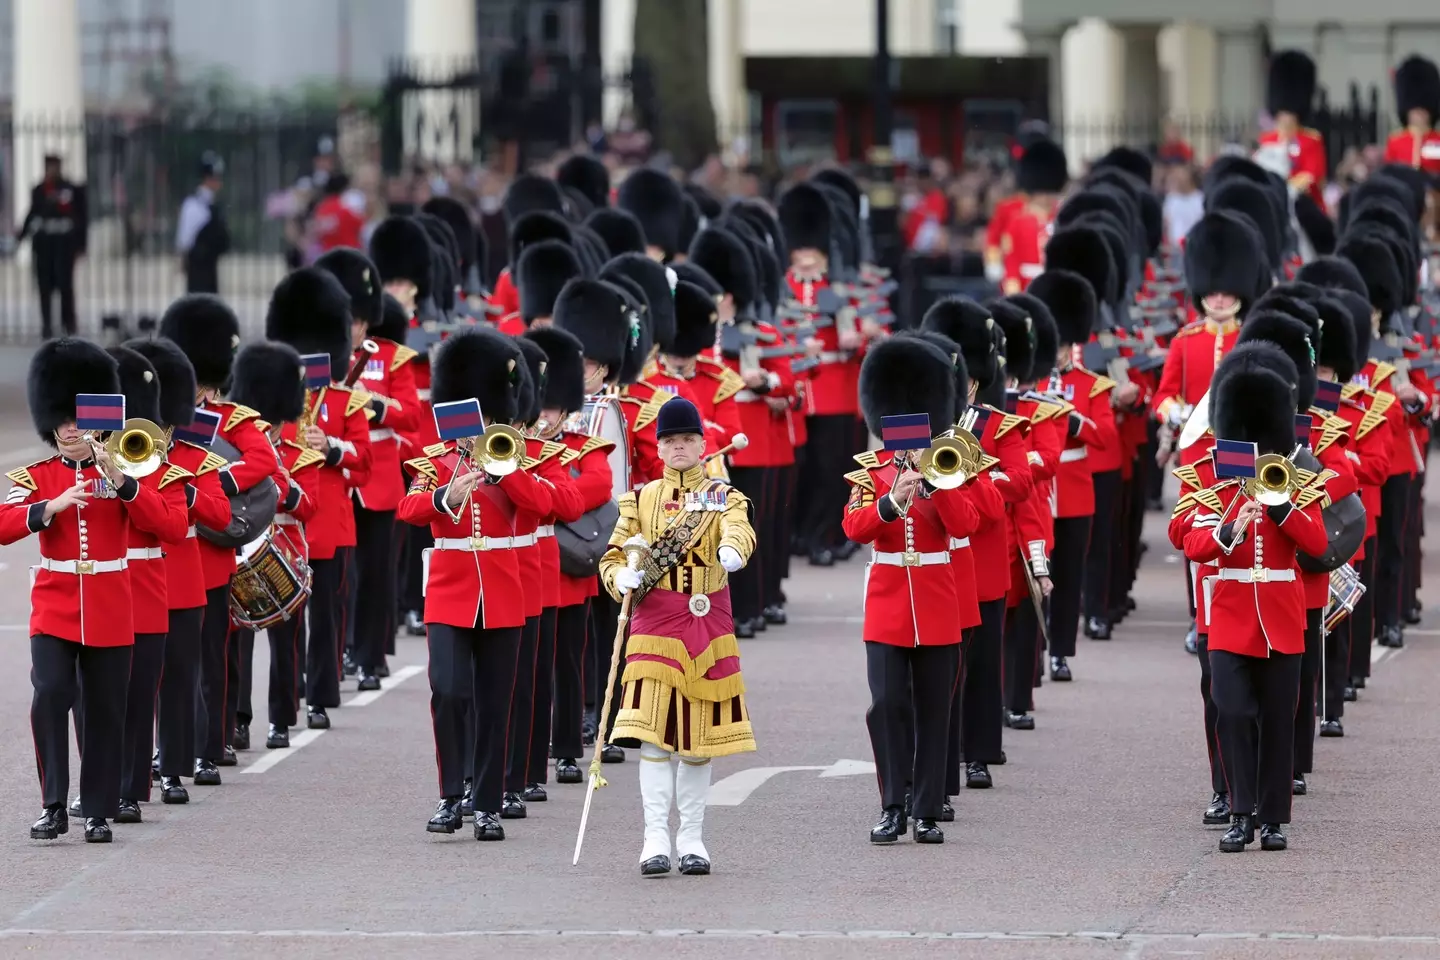 Trooping the Colour is the Queen's birthday celebration.